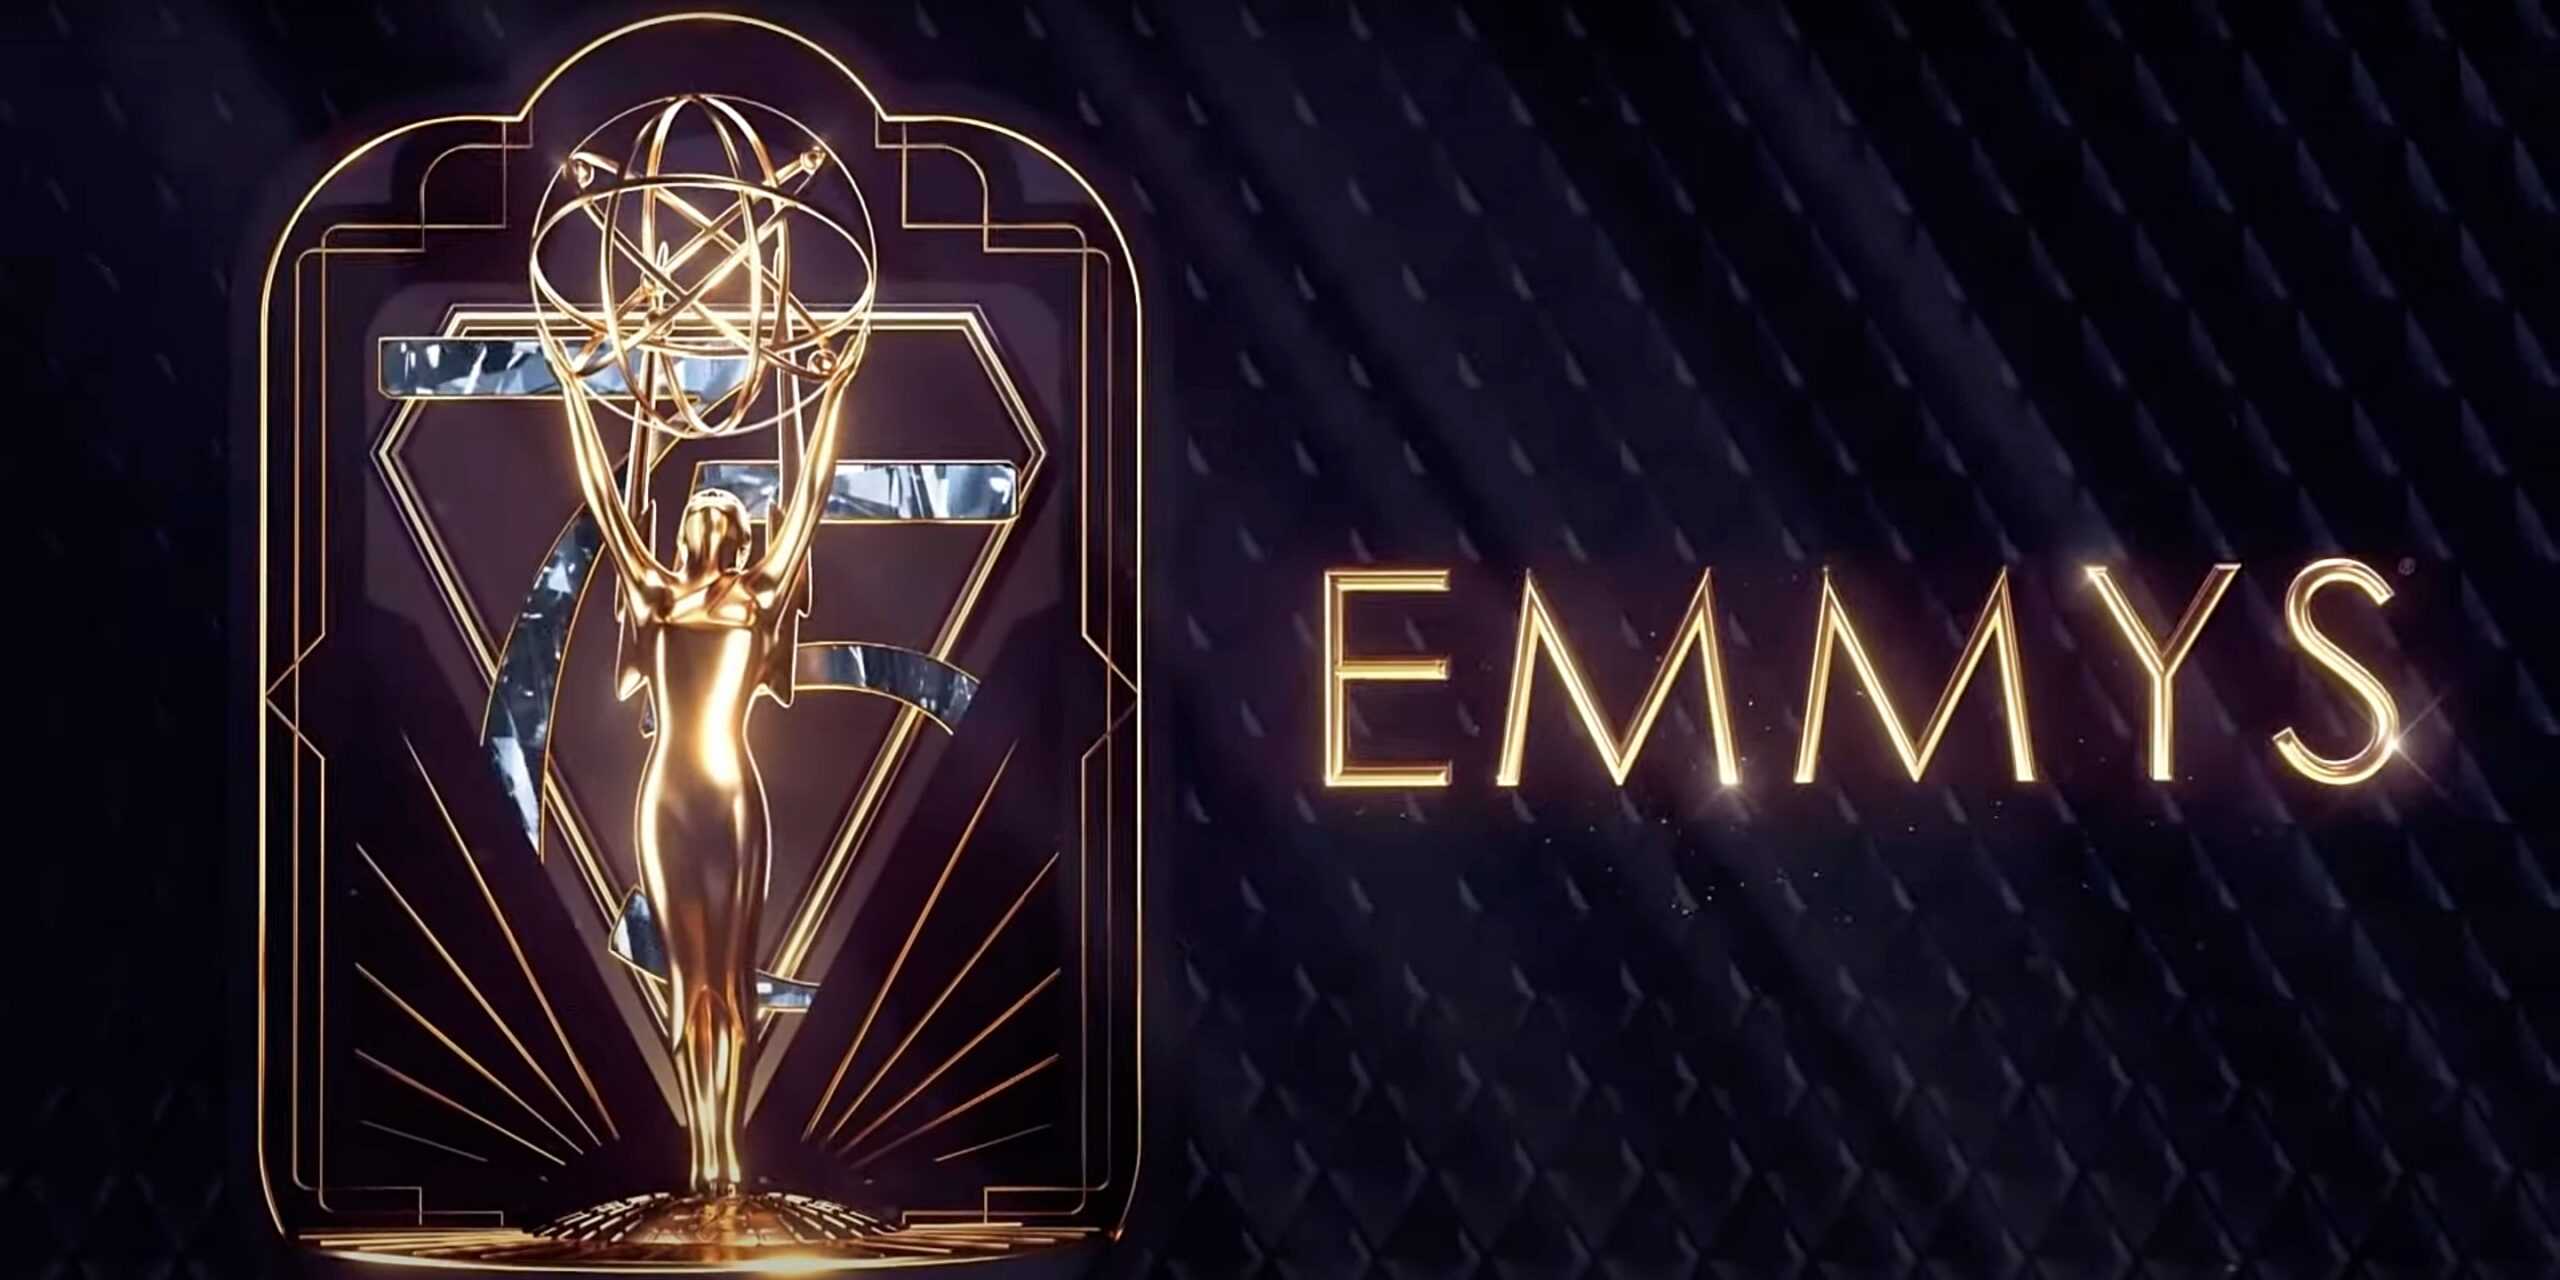 The 75th Emmys announcement logo from Fox.